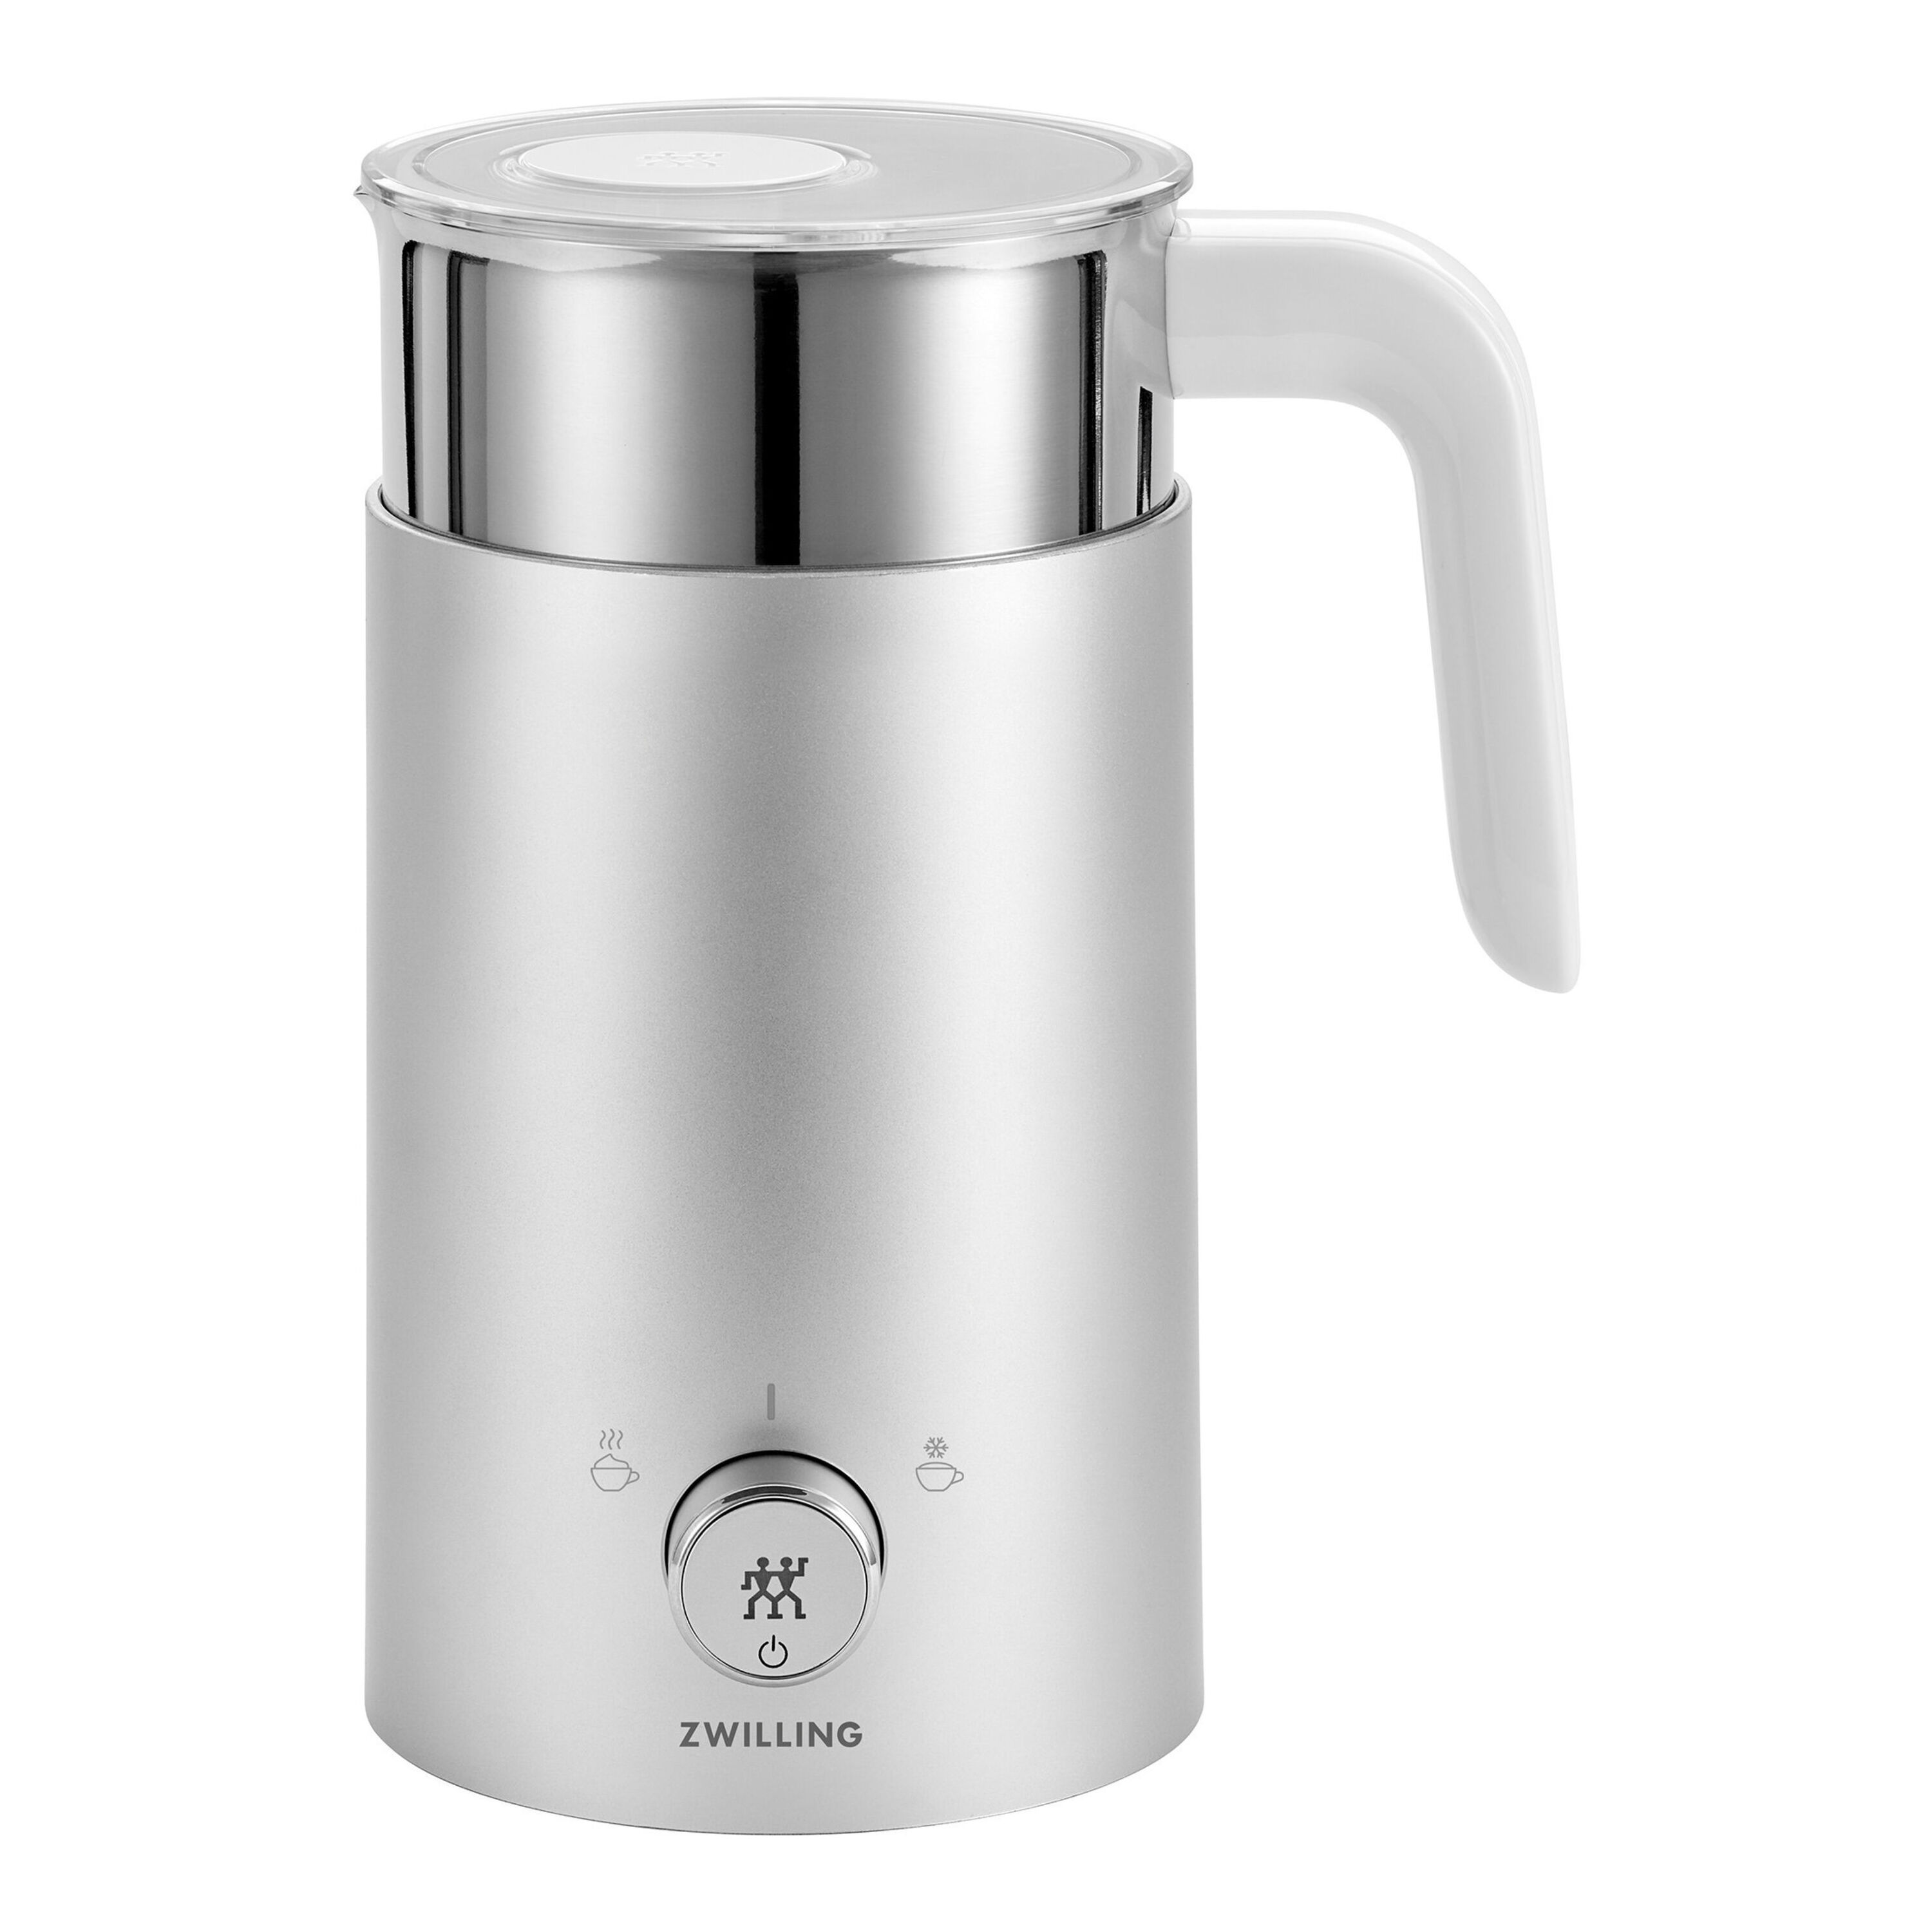 Why I Love My Electric Milk Frother